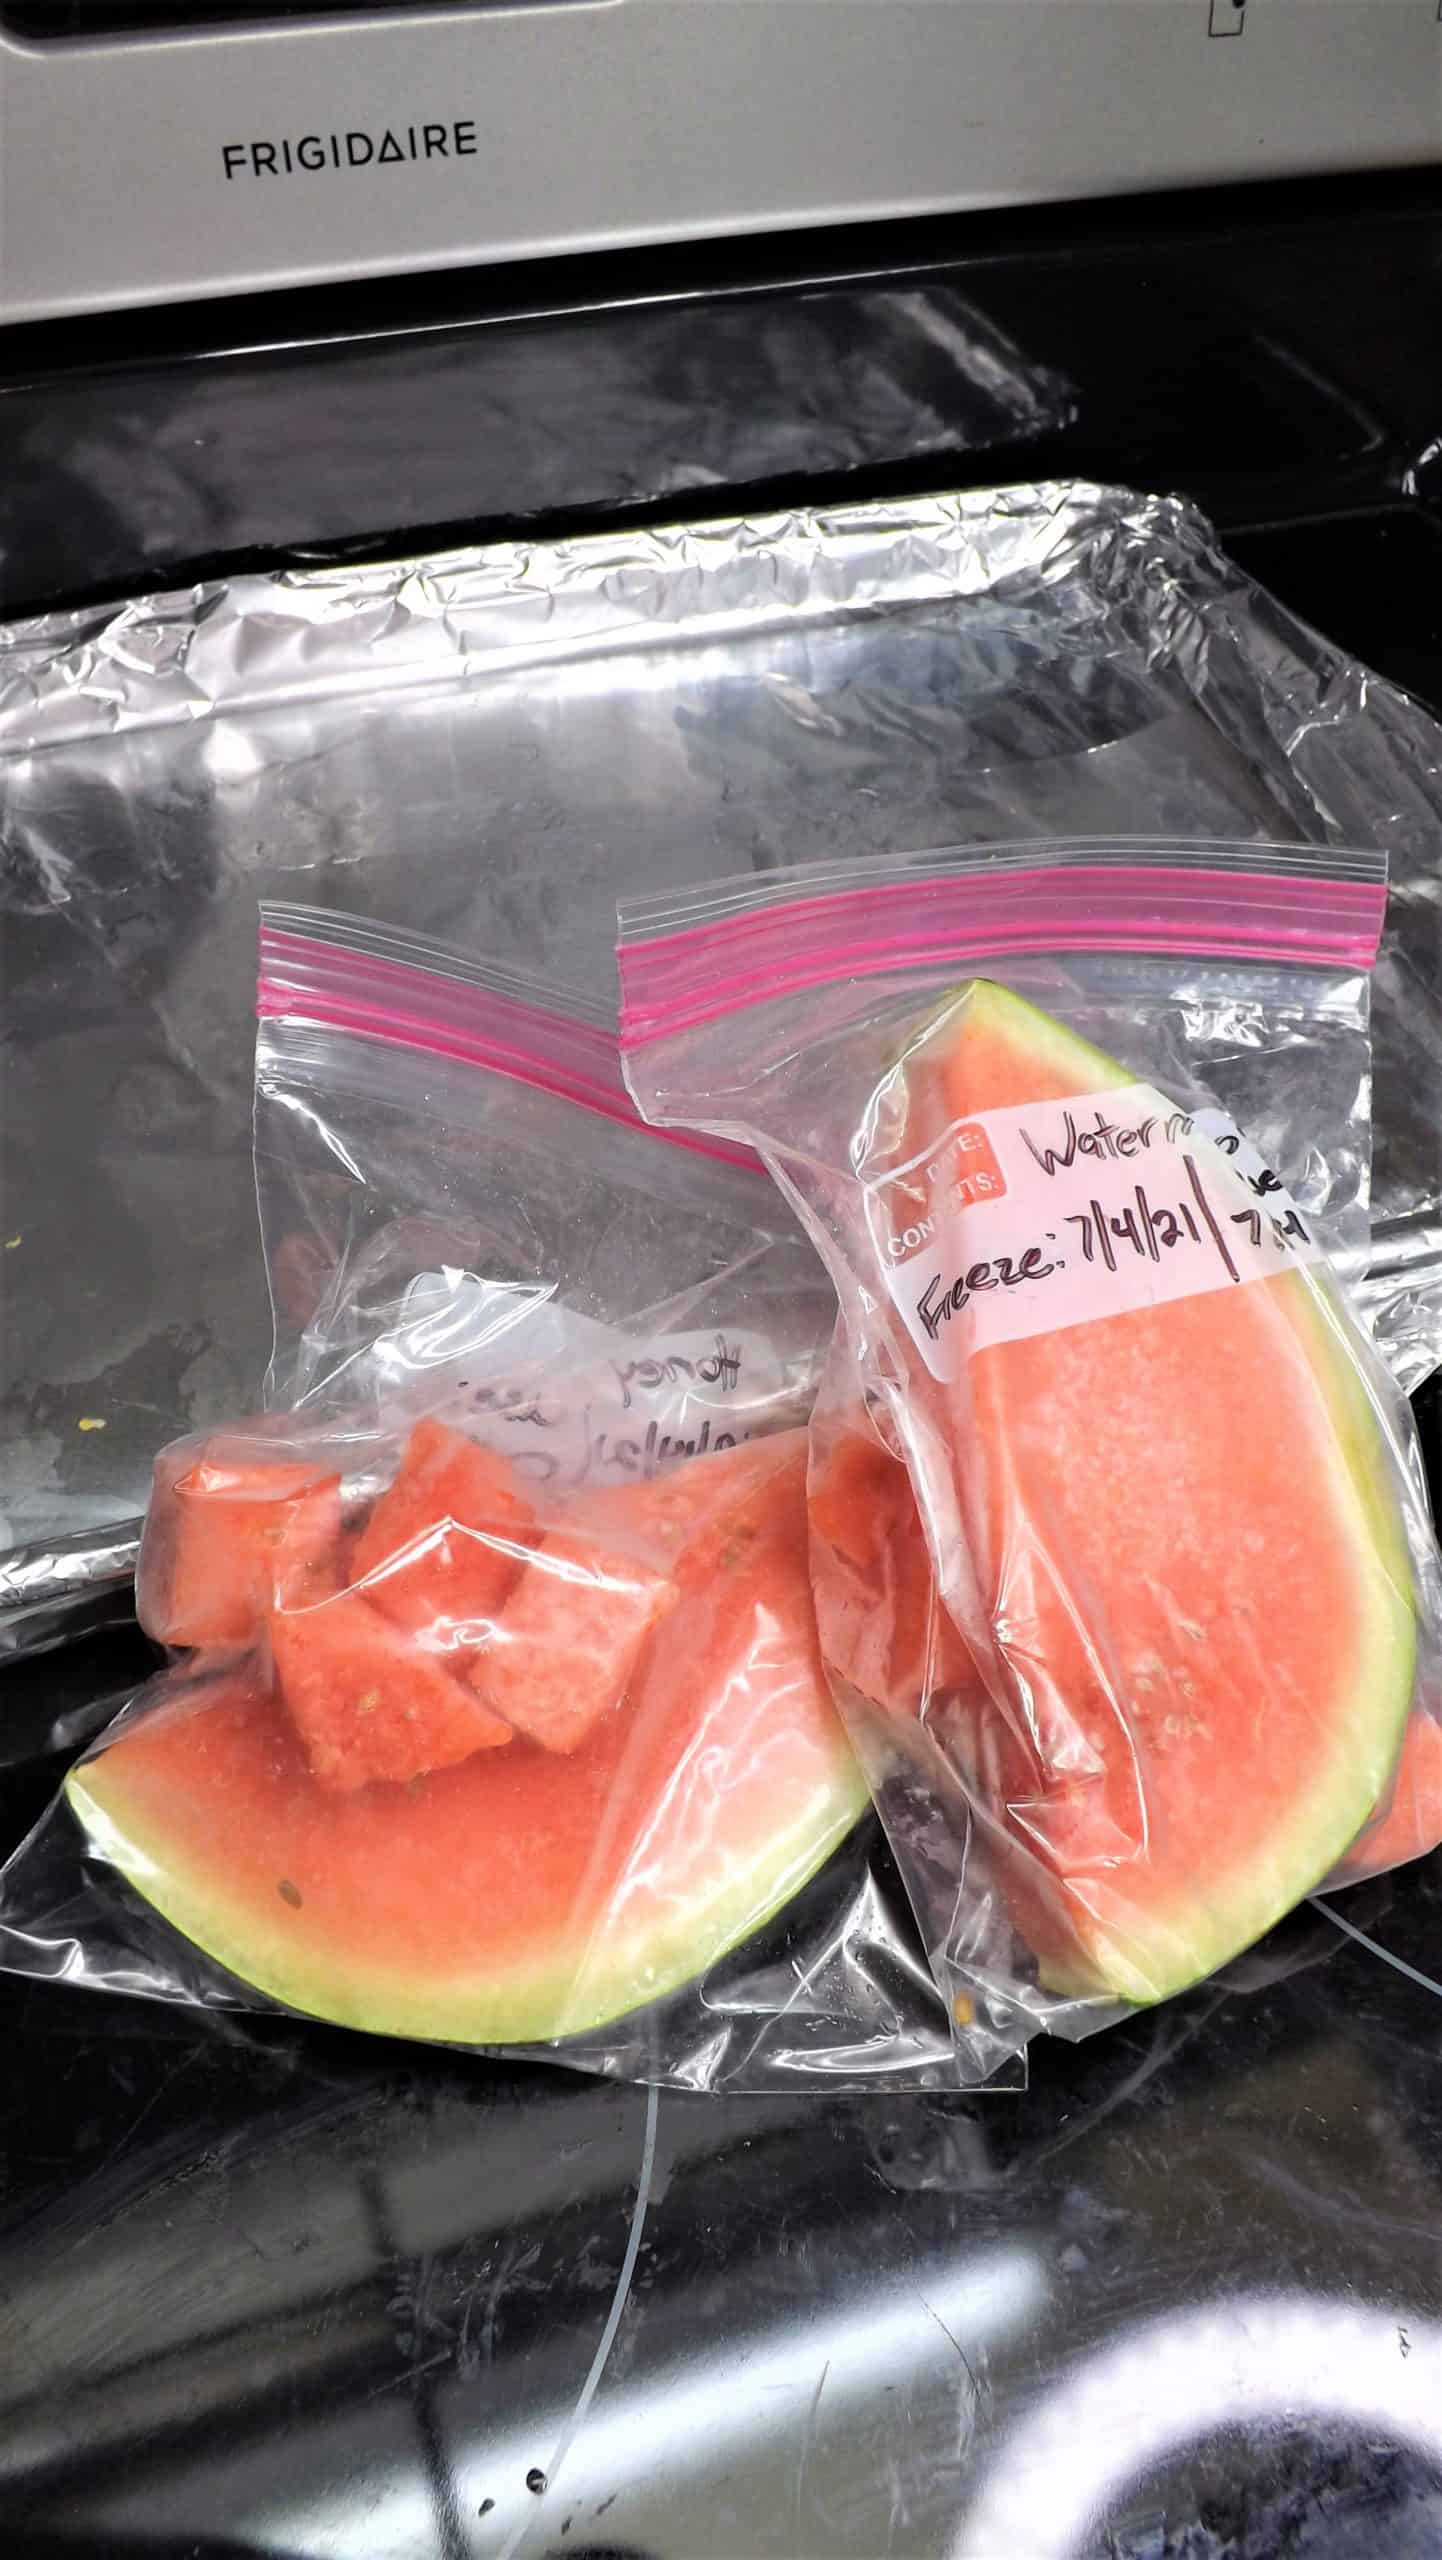 freezer bags of frozen watermelon in front of baking pan wrapped in foil